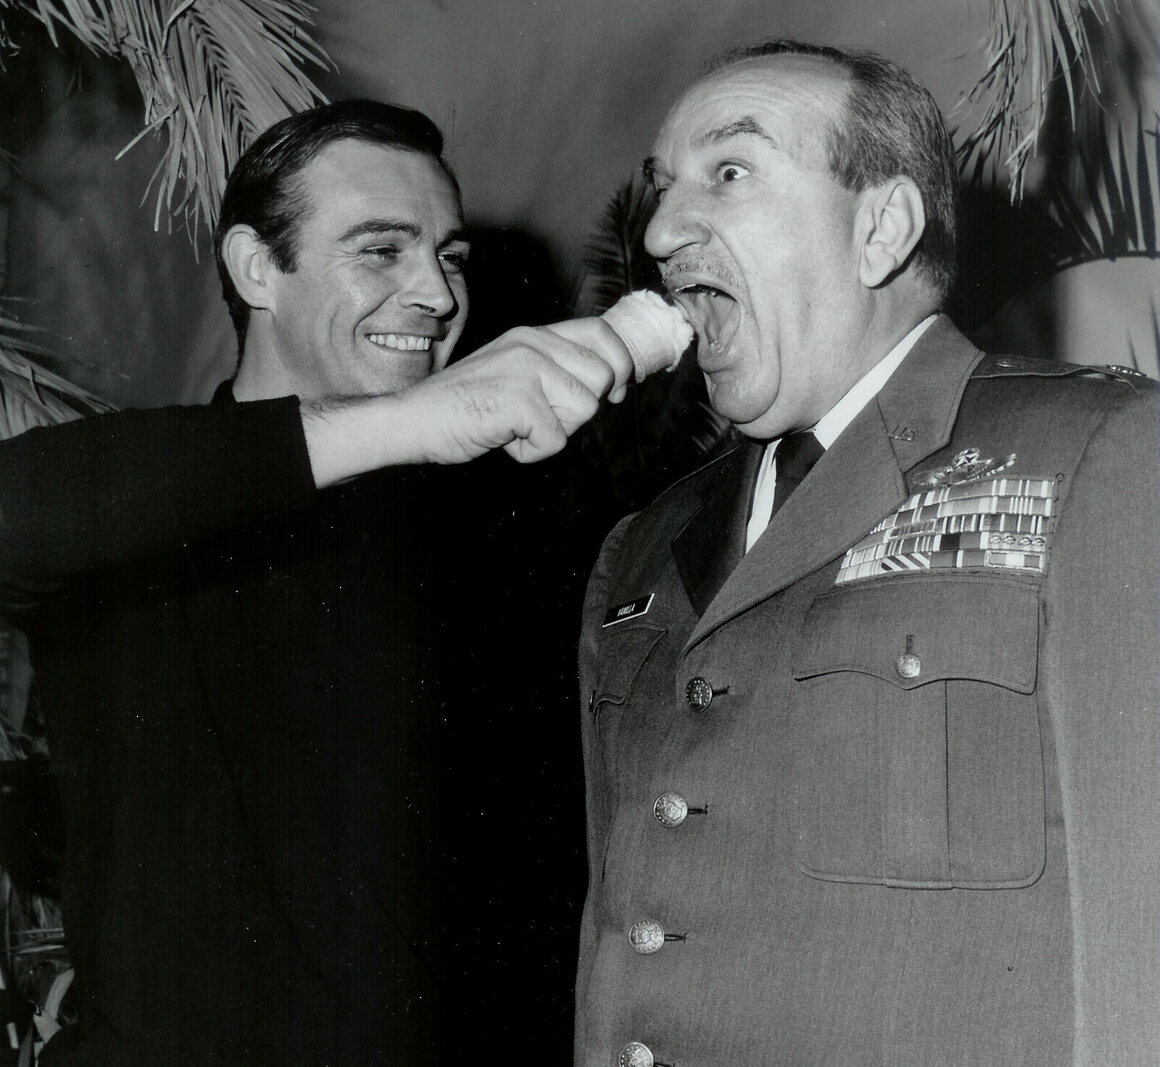 Sean Connery feigns shoving a vanilla ice cream cone in retired Lt. Col. Charles Russhon’s face on set during <em>Thunderball</em>. Russhon was the military adviser to the Bond films in the 1960s and 1970s and eventually became friends with Connery. 